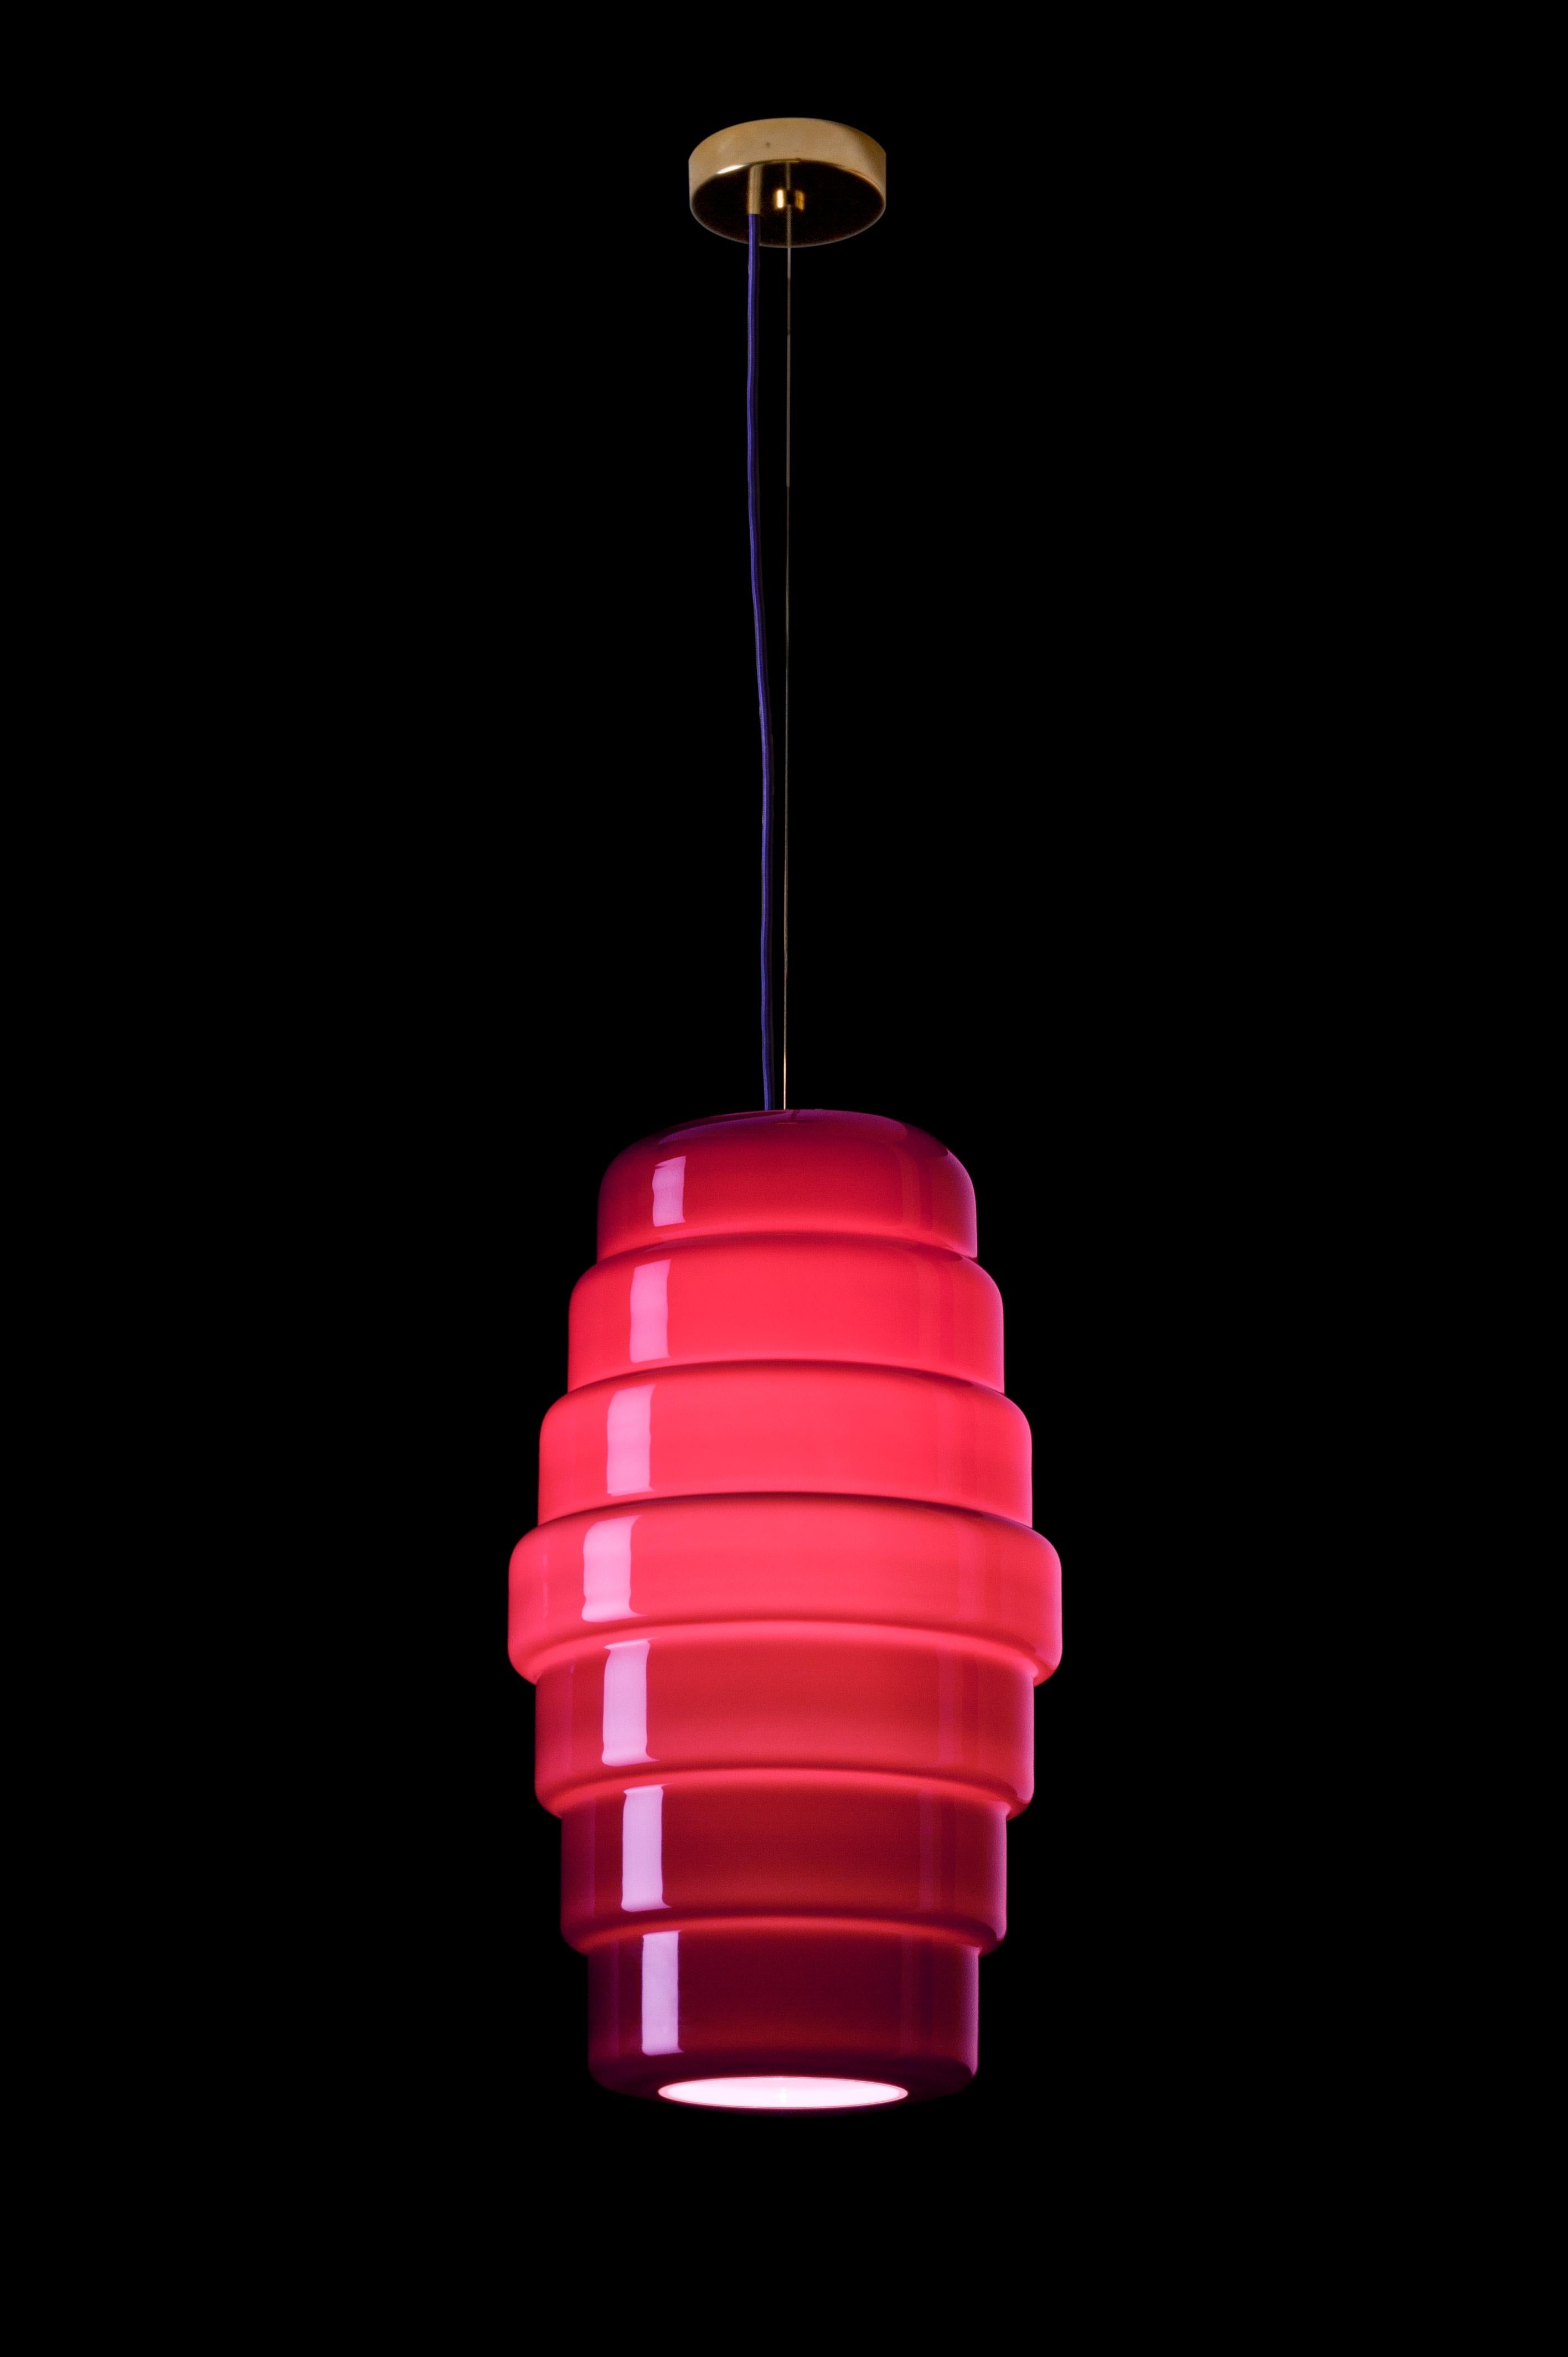 Zoe pendant lamp, designed by Doriana and Massimiliano Fuksas and manufactured by Venini, features a lantern shape. Available in two different sizes. Indoor use only.

Dimensions: Ø 30 cm, H 52.5 cm.